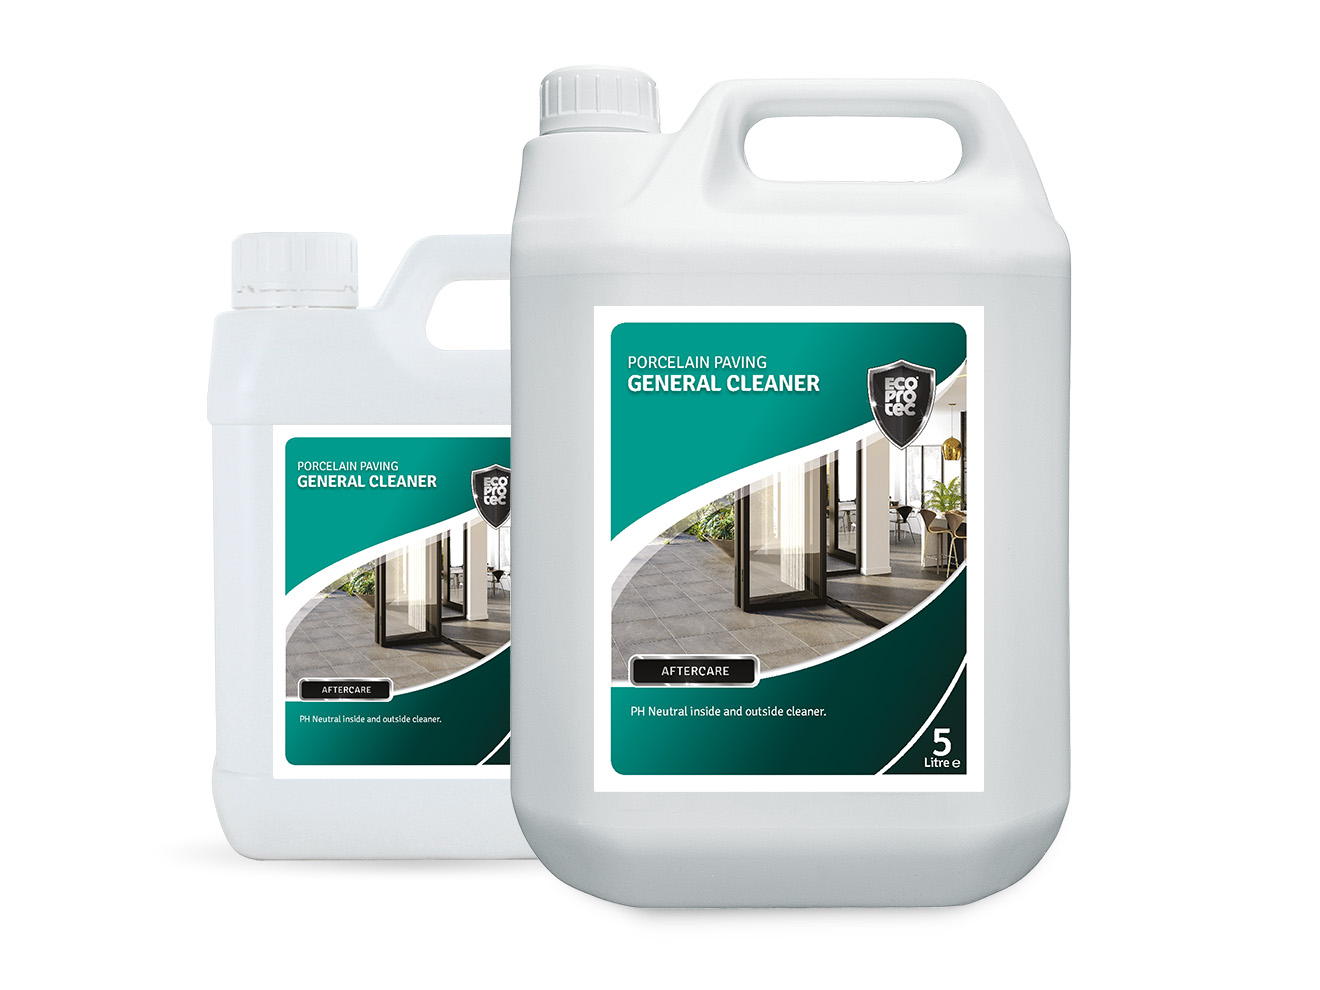 Ecoprotec General Cleaner